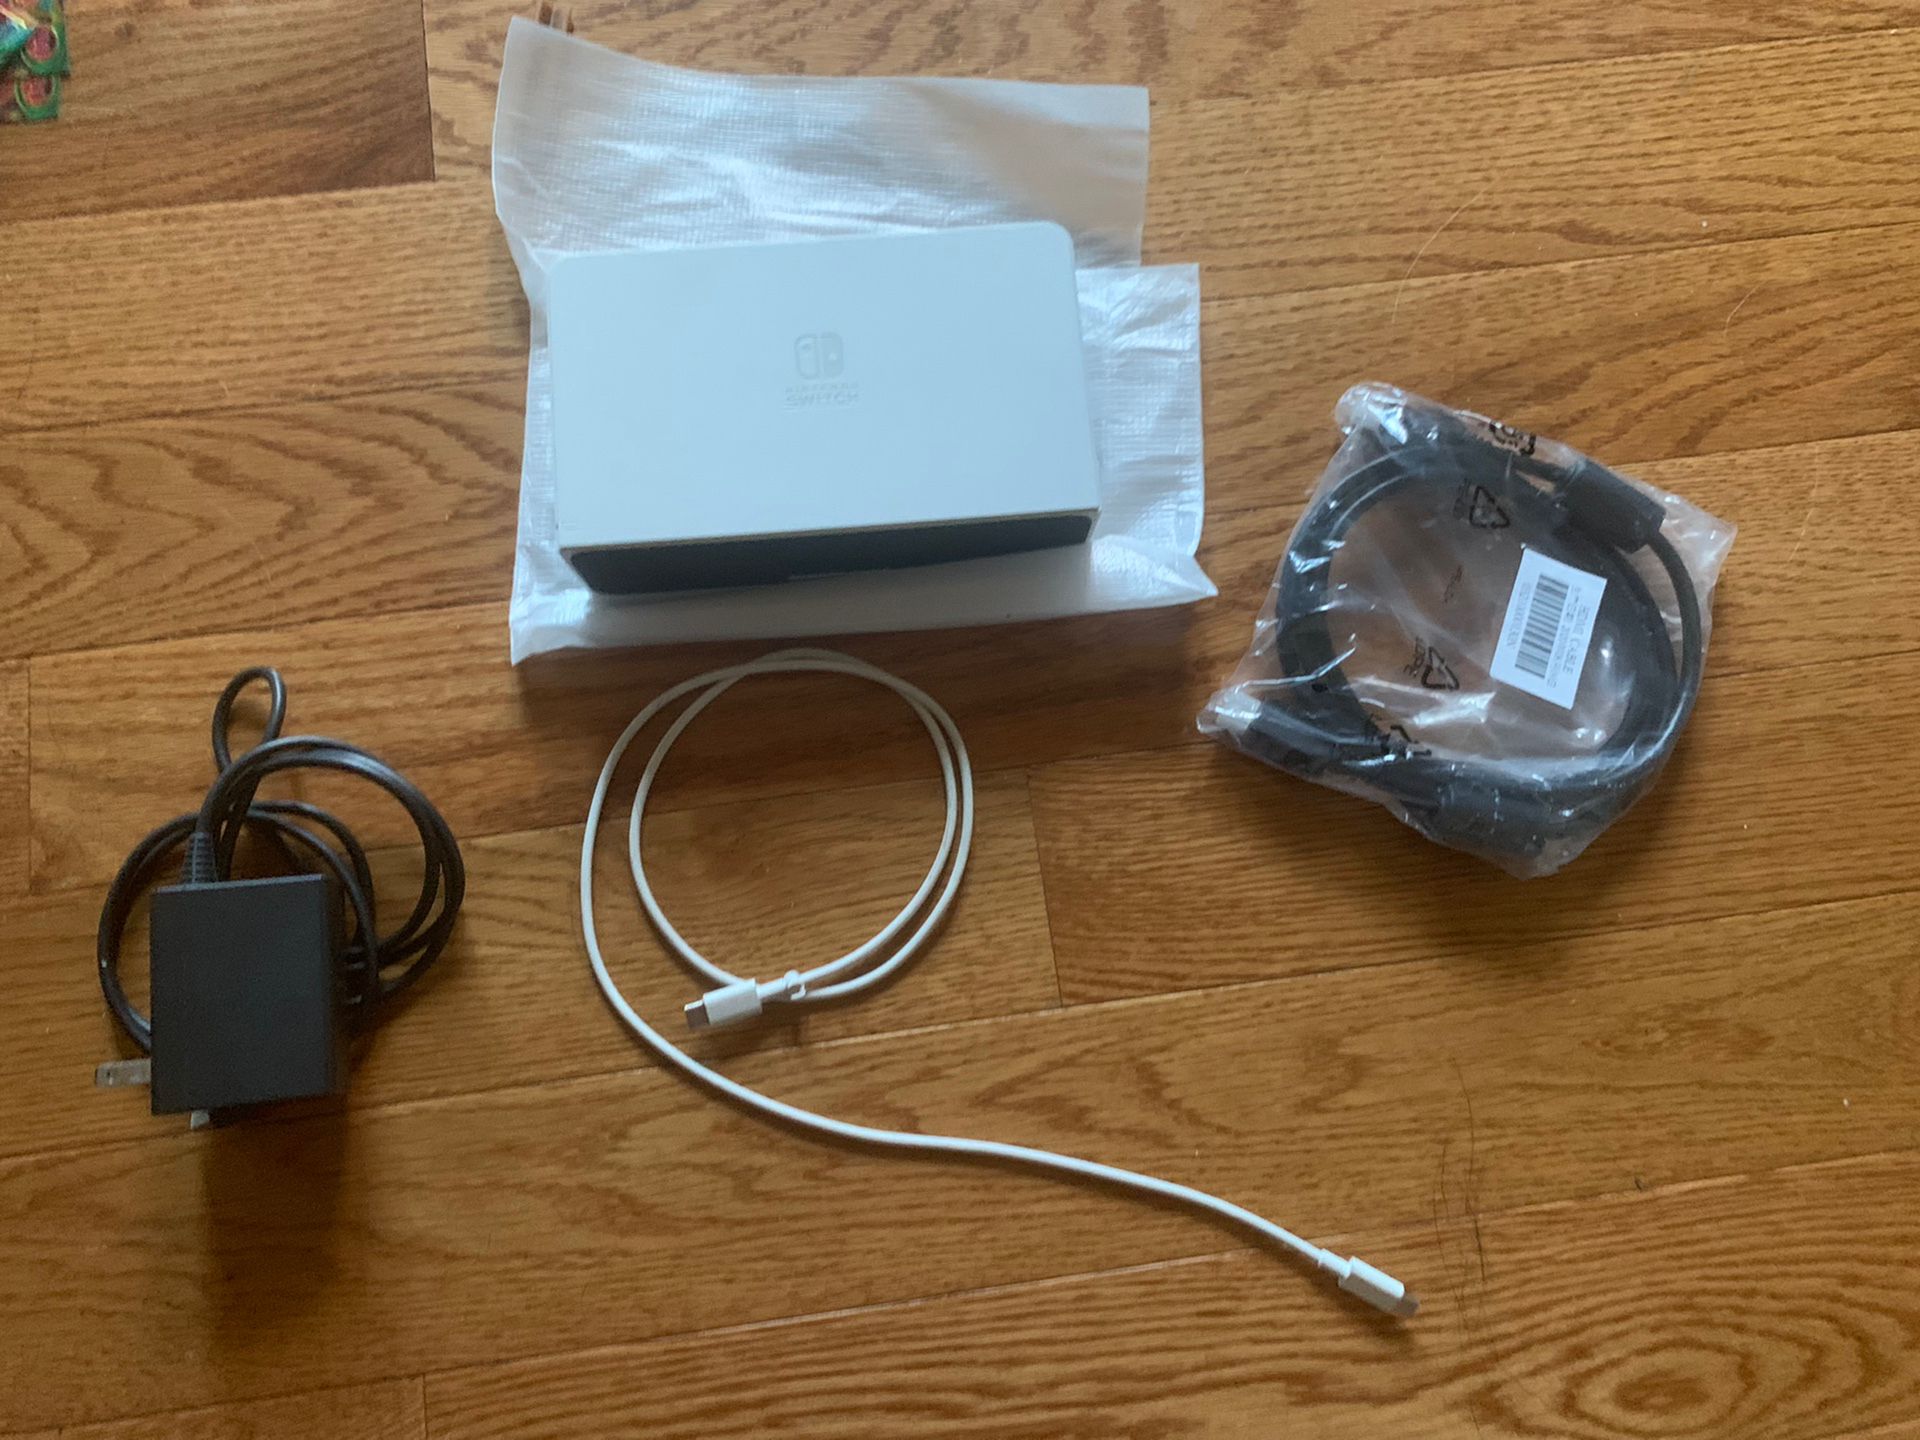 NEW White Oled Nintendo Dock Charger/TV SELL OR TRADE 